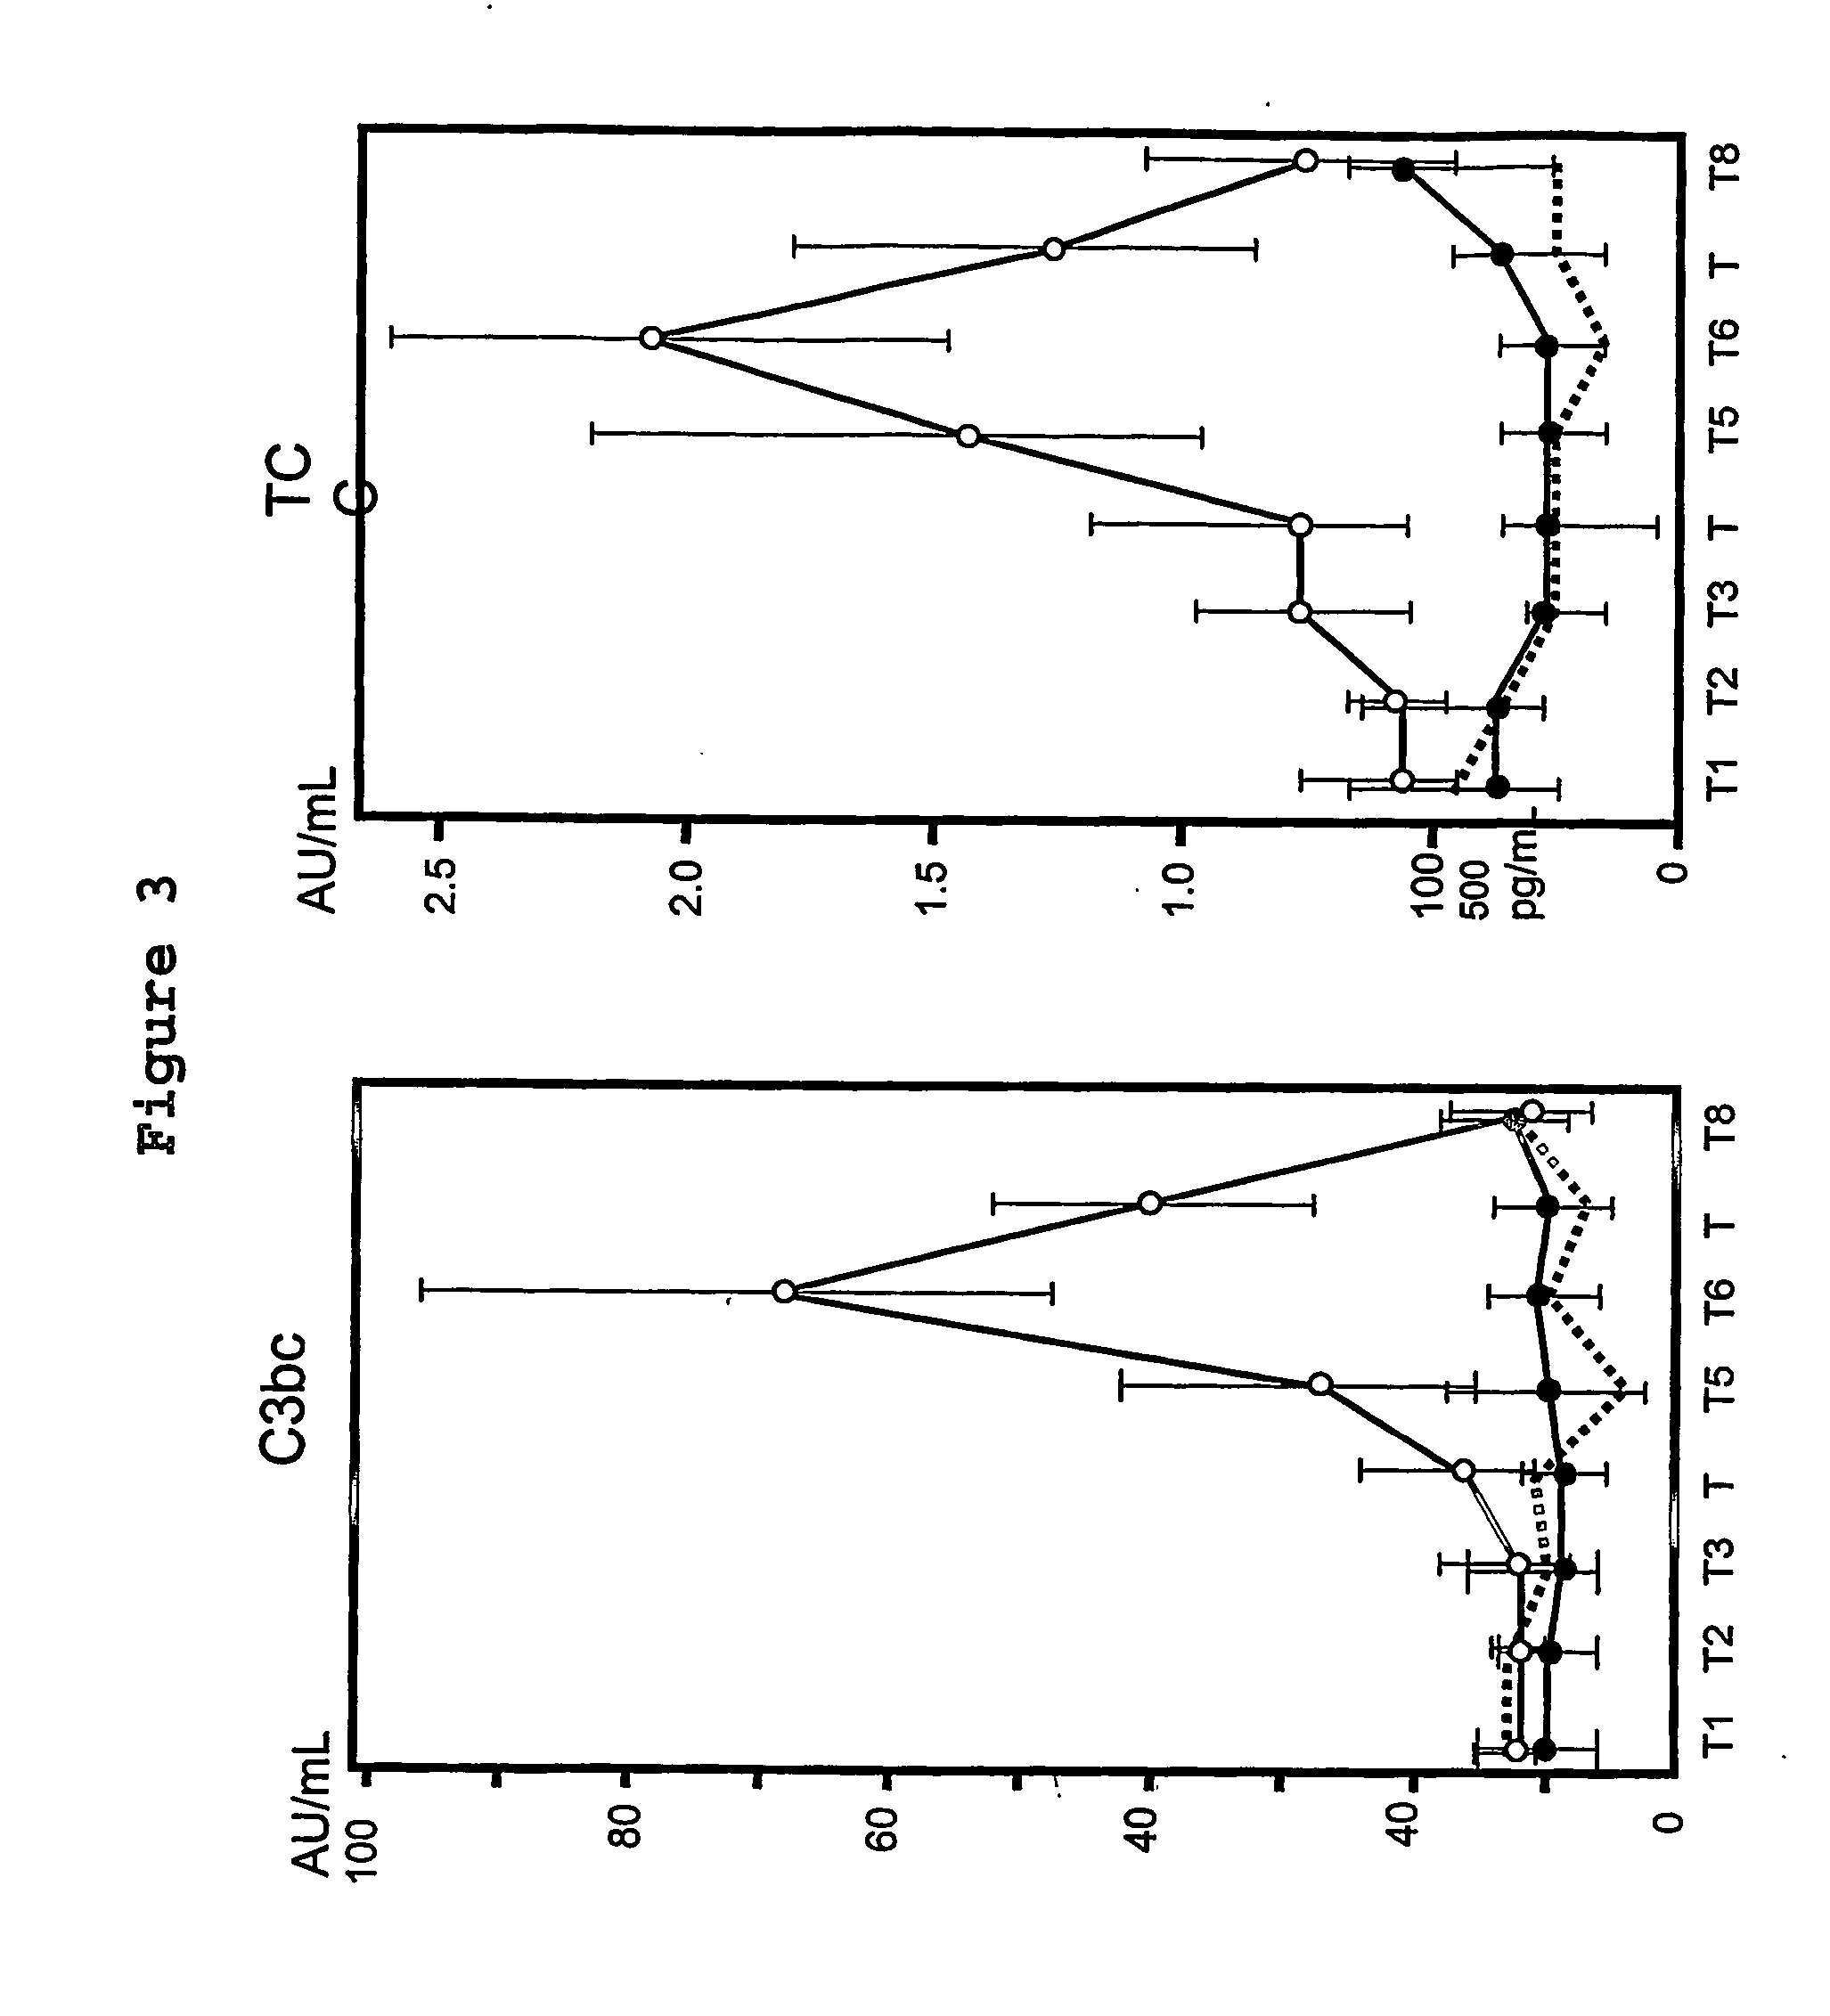 Methods for preventing and treating tissue damage associated with ischemia-reperfusion injury